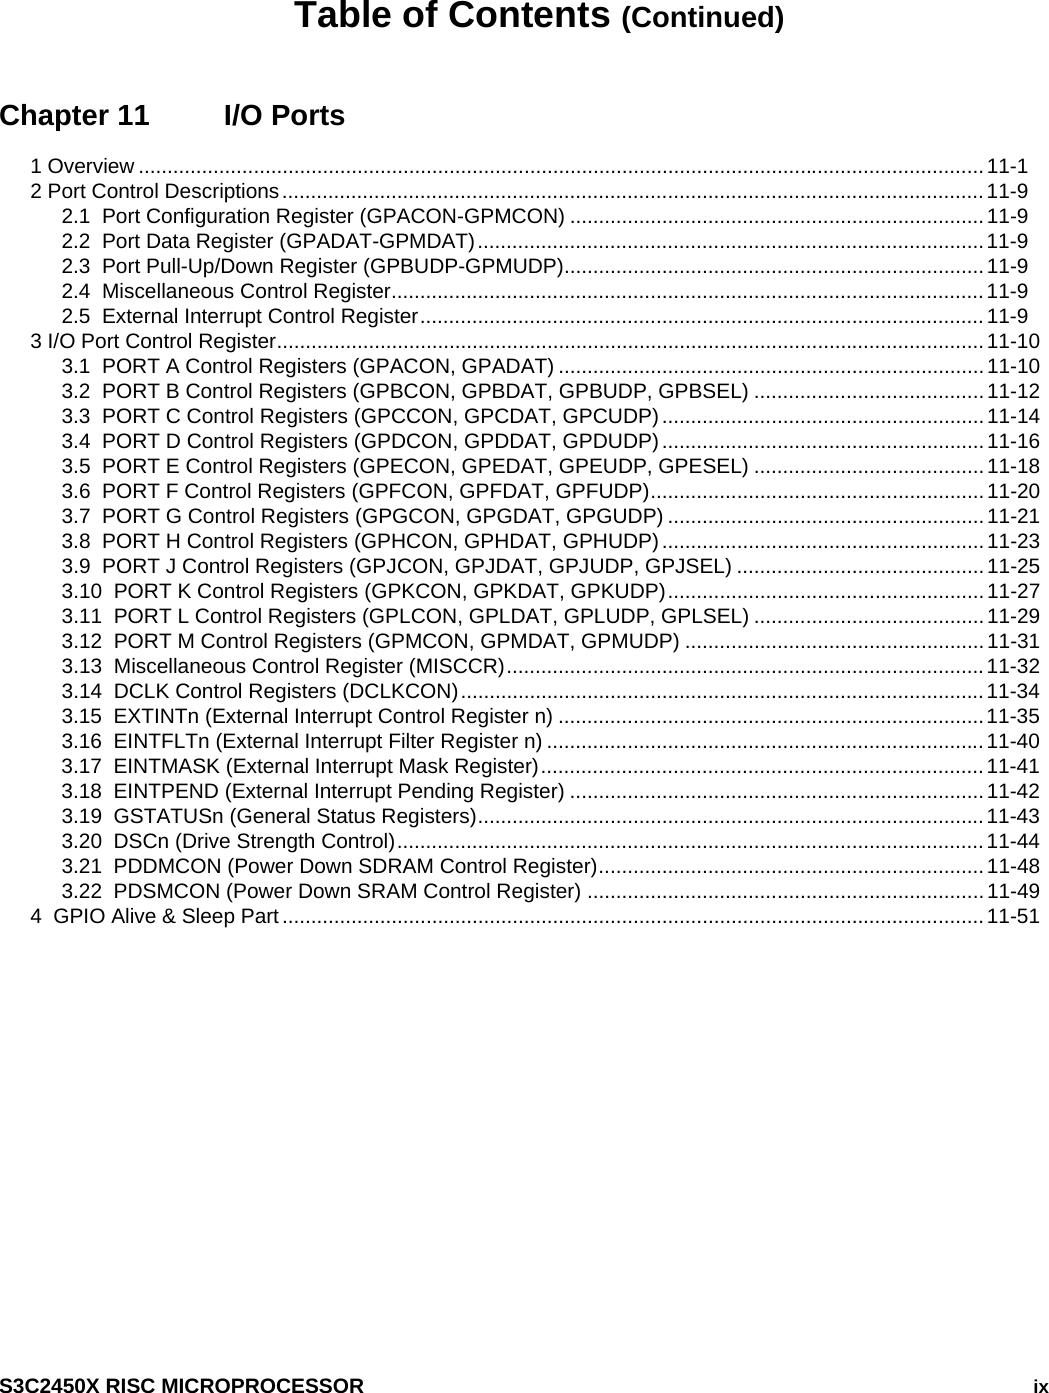    S3C2450X RISC MICROPROCESSOR   ix Table of Contents (Continued) Chapter 11  I/O Ports 1 Overview ...................................................................................................................................................11-1 2 Port Control Descriptions..........................................................................................................................11-9 2.1  Port Configuration Register (GPACON-GPMCON) ........................................................................11-9 2.2  Port Data Register (GPADAT-GPMDAT)........................................................................................11-9 2.3  Port Pull-Up/Down Register (GPBUDP-GPMUDP).........................................................................11-9 2.4  Miscellaneous Control Register.......................................................................................................11-9 2.5  External Interrupt Control Register..................................................................................................11-9 3 I/O Port Control Register...........................................................................................................................11-10 3.1  PORT A Control Registers (GPACON, GPADAT) ..........................................................................11-10 3.2  PORT B Control Registers (GPBCON, GPBDAT, GPBUDP, GPBSEL) ........................................11-12 3.3  PORT C Control Registers (GPCCON, GPCDAT, GPCUDP)........................................................11-14 3.4  PORT D Control Registers (GPDCON, GPDDAT, GPDUDP)........................................................11-16 3.5  PORT E Control Registers (GPECON, GPEDAT, GPEUDP, GPESEL) ........................................11-18 3.6  PORT F Control Registers (GPFCON, GPFDAT, GPFUDP).......................................................... 11-20 3.7  PORT G Control Registers (GPGCON, GPGDAT, GPGUDP) .......................................................11-21 3.8  PORT H Control Registers (GPHCON, GPHDAT, GPHUDP)........................................................11-23 3.9  PORT J Control Registers (GPJCON, GPJDAT, GPJUDP, GPJSEL) ...........................................11-25 3.10  PORT K Control Registers (GPKCON, GPKDAT, GPKUDP)....................................................... 11-27 3.11  PORT L Control Registers (GPLCON, GPLDAT, GPLUDP, GPLSEL) ........................................11-29 3.12  PORT M Control Registers (GPMCON, GPMDAT, GPMUDP) ....................................................11-31 3.13  Miscellaneous Control Register (MISCCR)...................................................................................11-32 3.14  DCLK Control Registers (DCLKCON)...........................................................................................11-34 3.15  EXTINTn (External Interrupt Control Register n) ..........................................................................11-35 3.16  EINTFLTn (External Interrupt Filter Register n) ............................................................................11-40 3.17  EINTMASK (External Interrupt Mask Register)............................................................................. 11-41 3.18  EINTPEND (External Interrupt Pending Register) ........................................................................11-42 3.19  GSTATUSn (General Status Registers)........................................................................................11-43 3.20  DSCn (Drive Strength Control)......................................................................................................11-44 3.21  PDDMCON (Power Down SDRAM Control Register)...................................................................11-48 3.22  PDSMCON (Power Down SRAM Control Register) .....................................................................11-49 4  GPIO Alive &amp; Sleep Part..........................................................................................................................11-51  